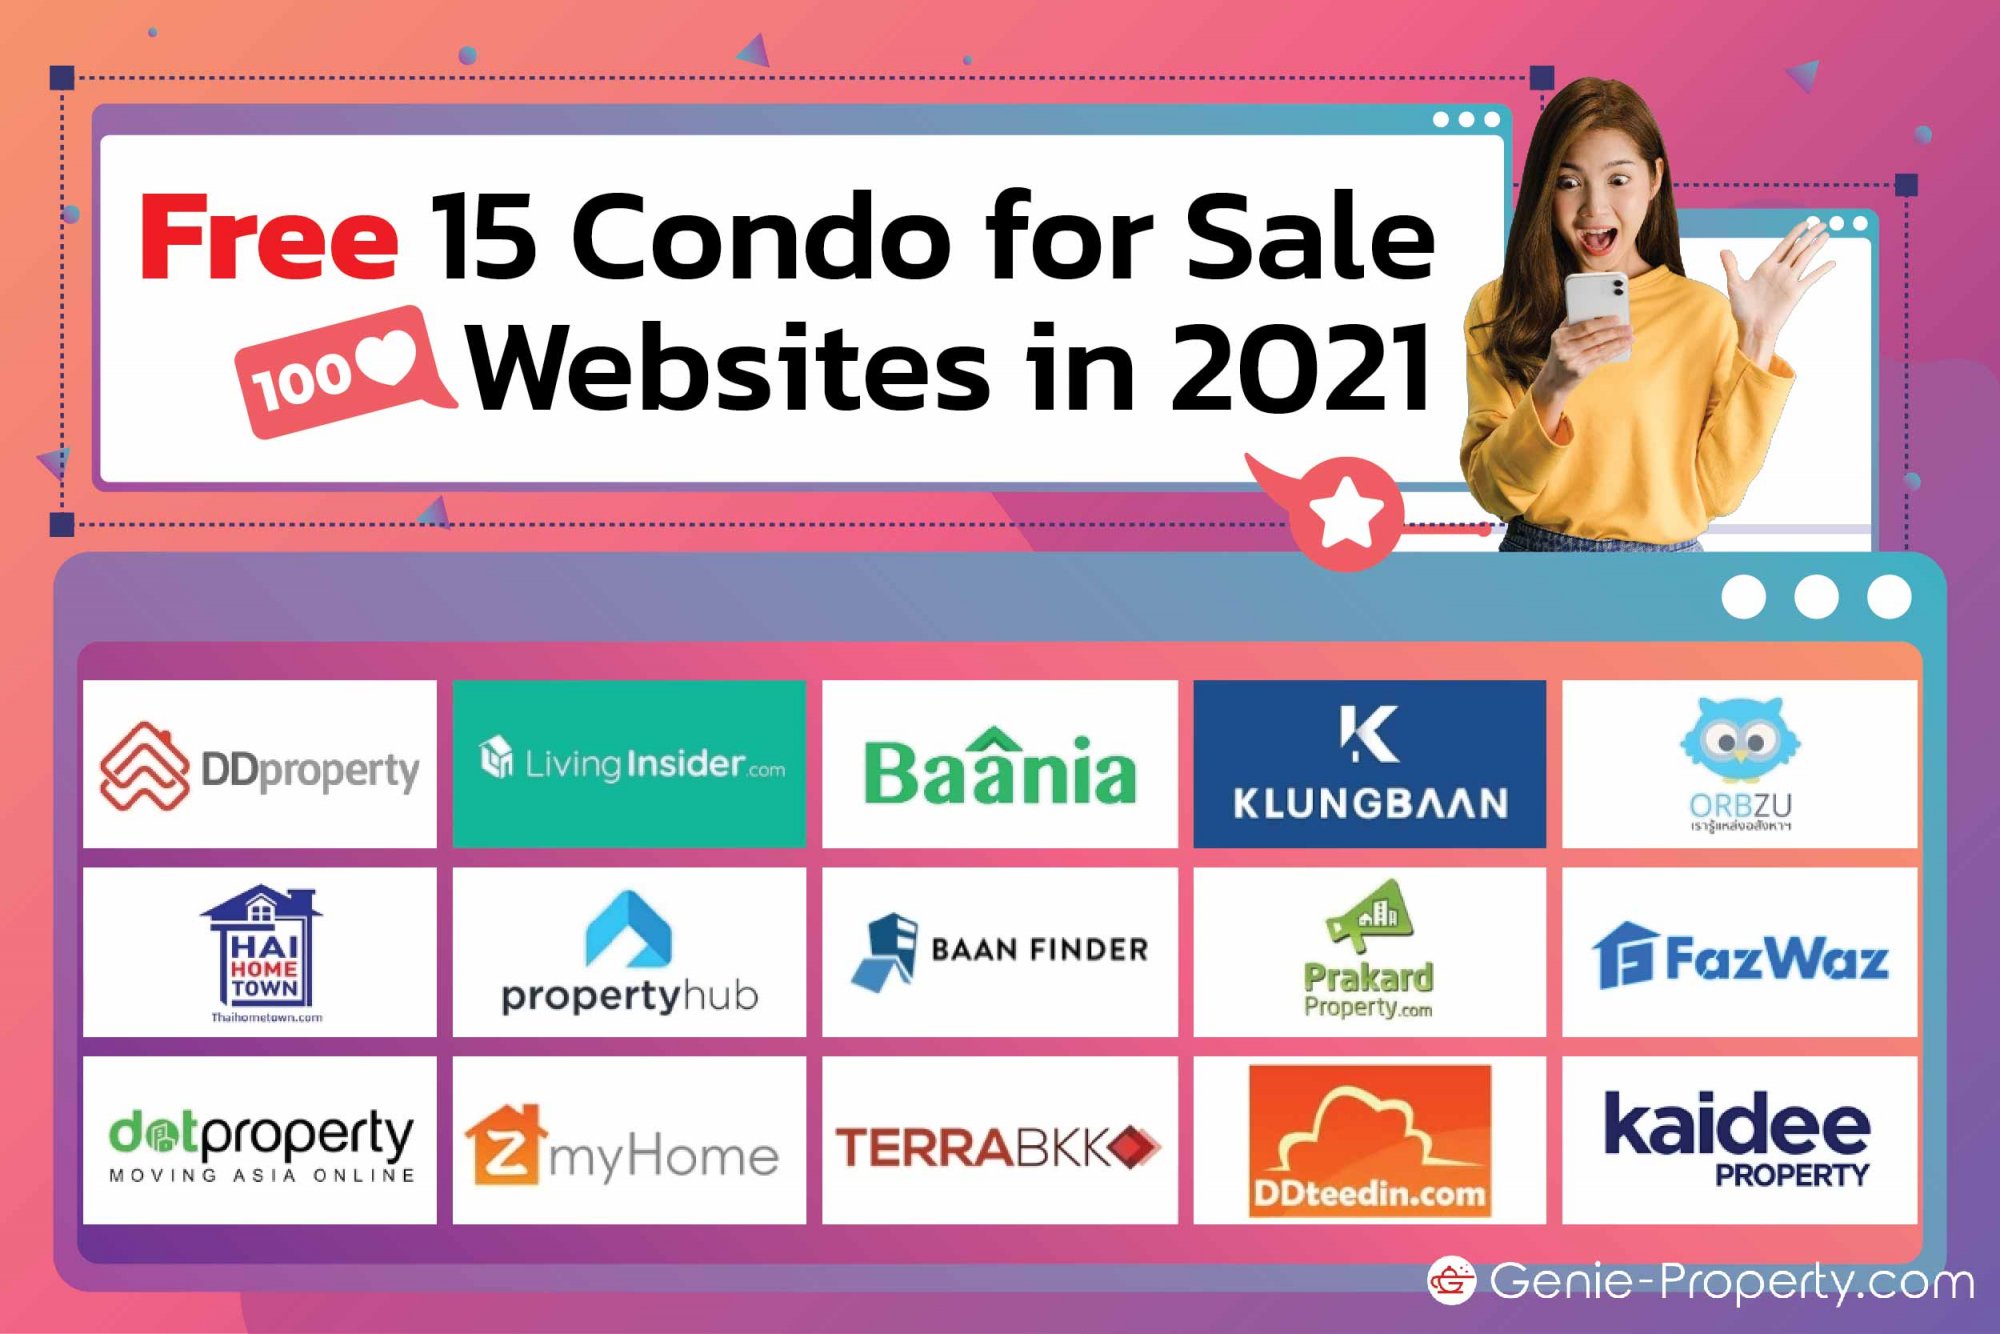 image for 15 Free Websites to Post Condo for Sale in Thailand for 2021